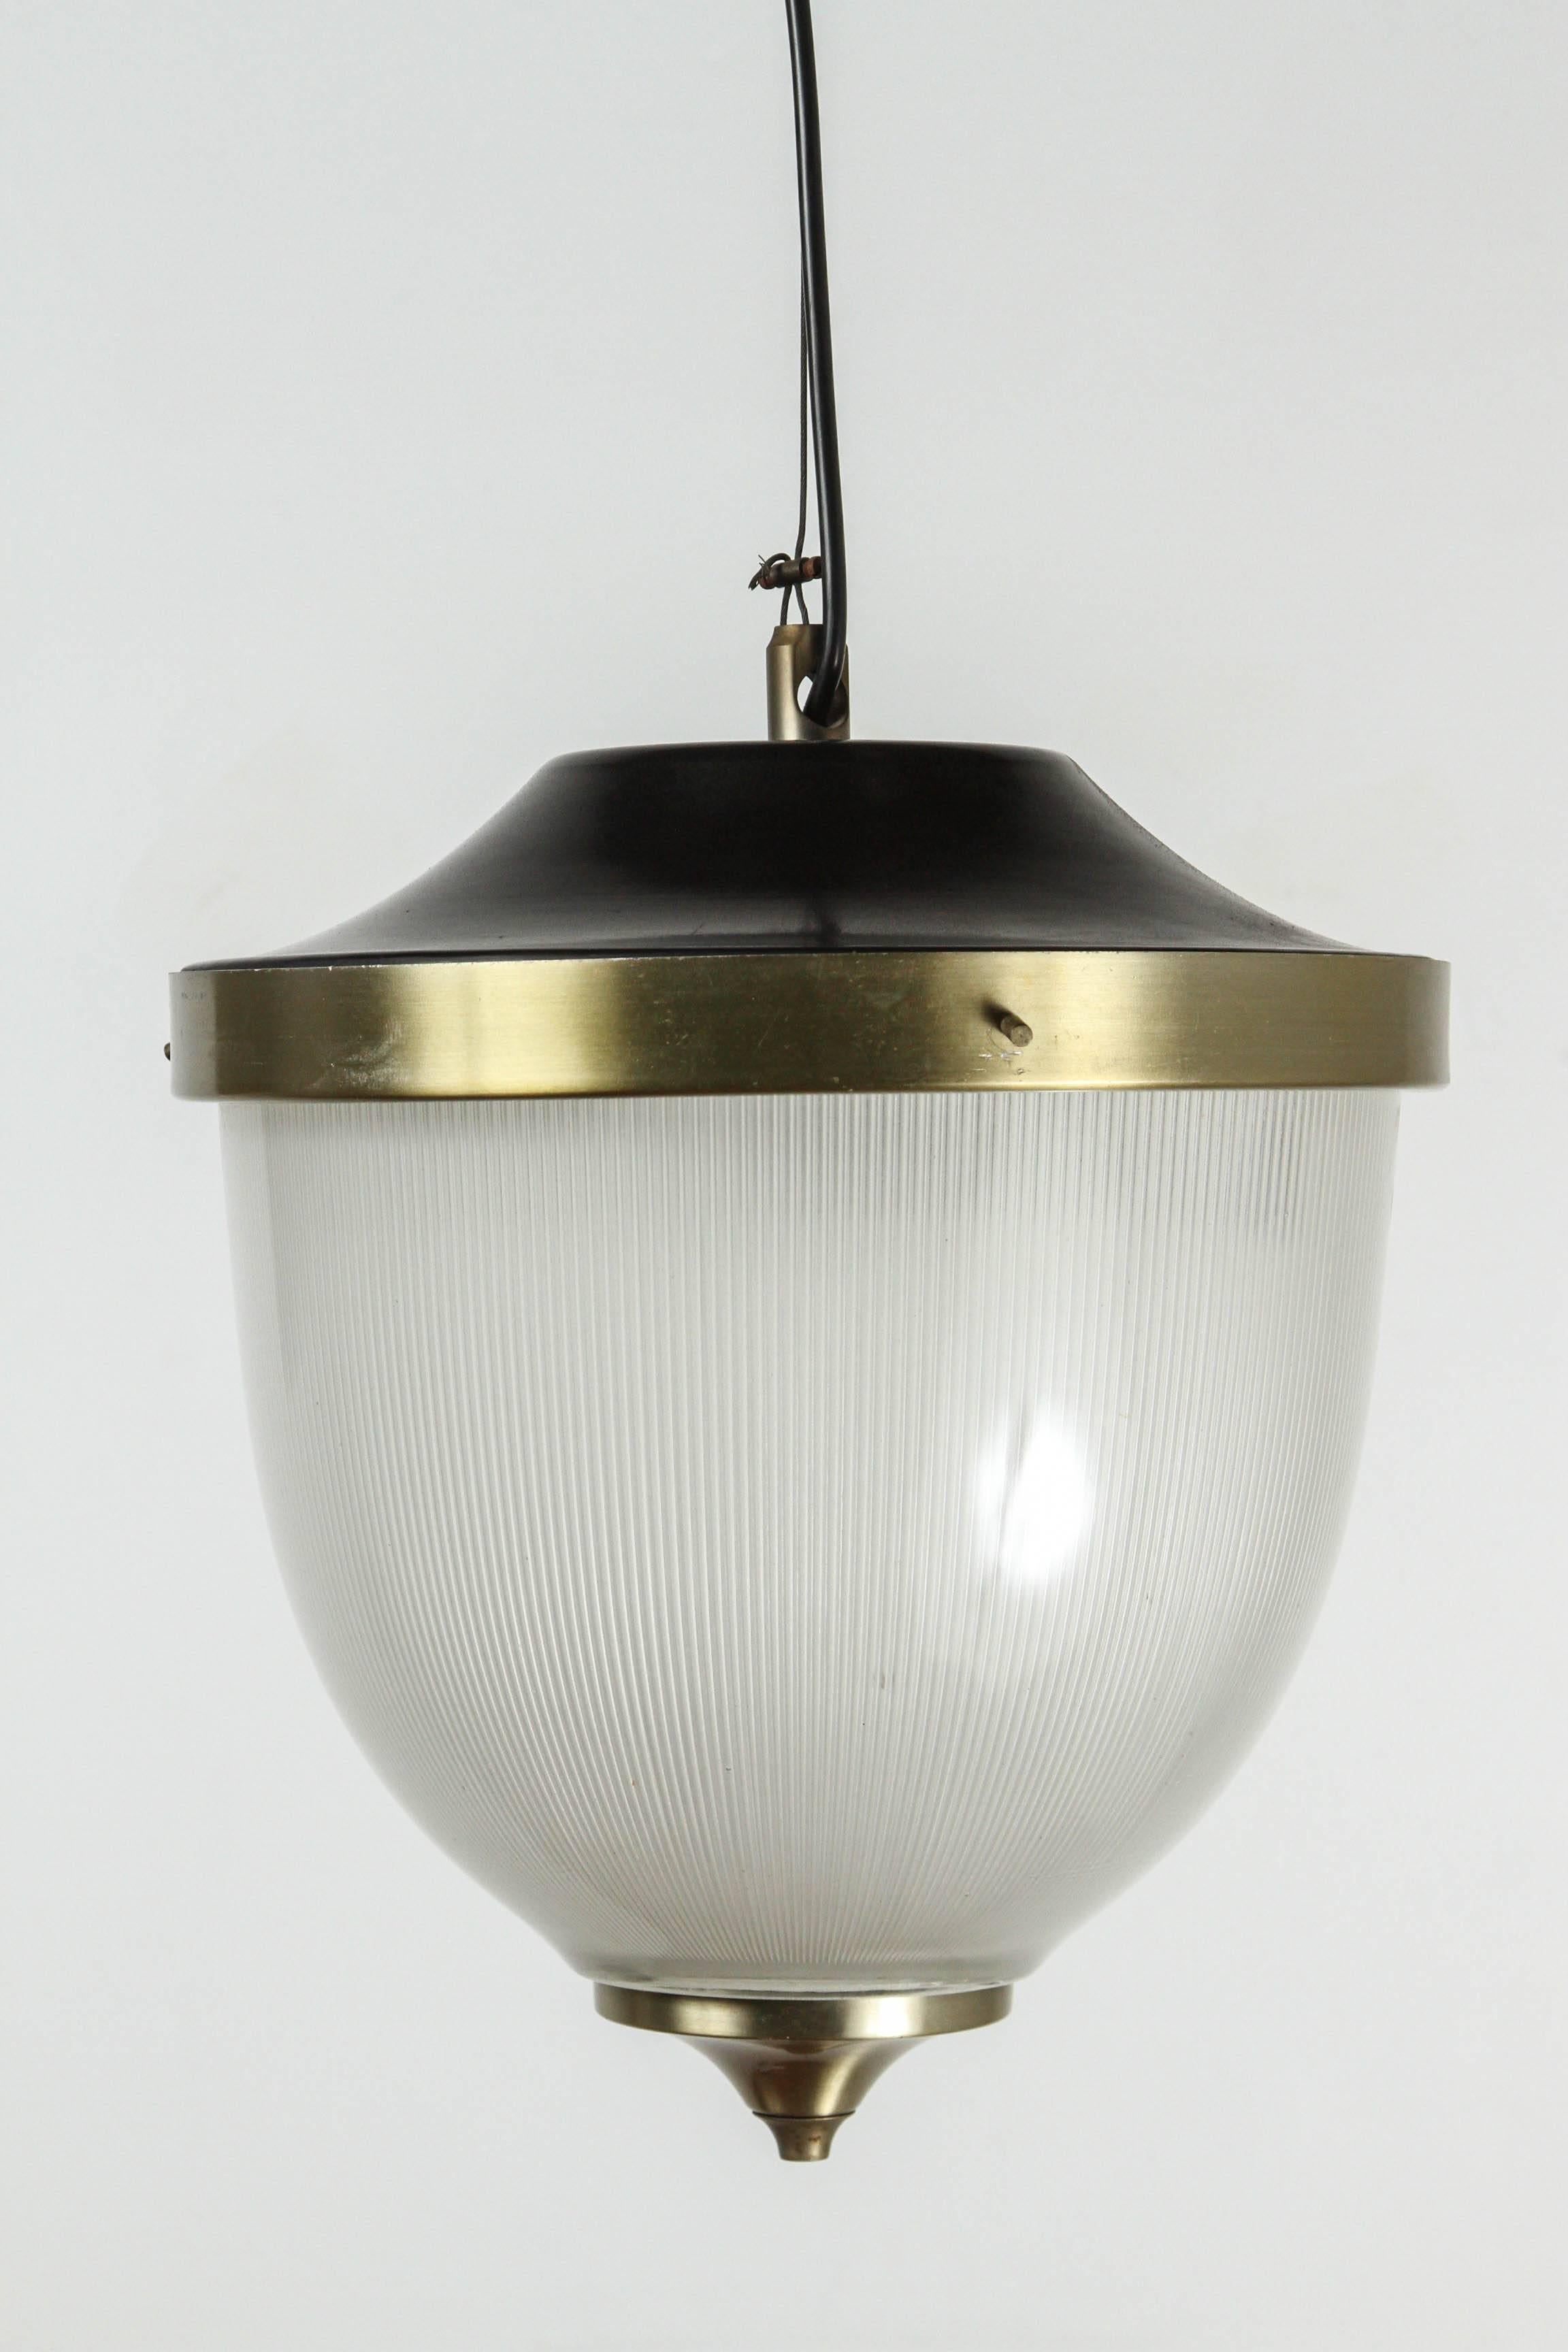 Mazzega Murano Pendant with Brass Fittings In Excellent Condition For Sale In Los Angeles, CA